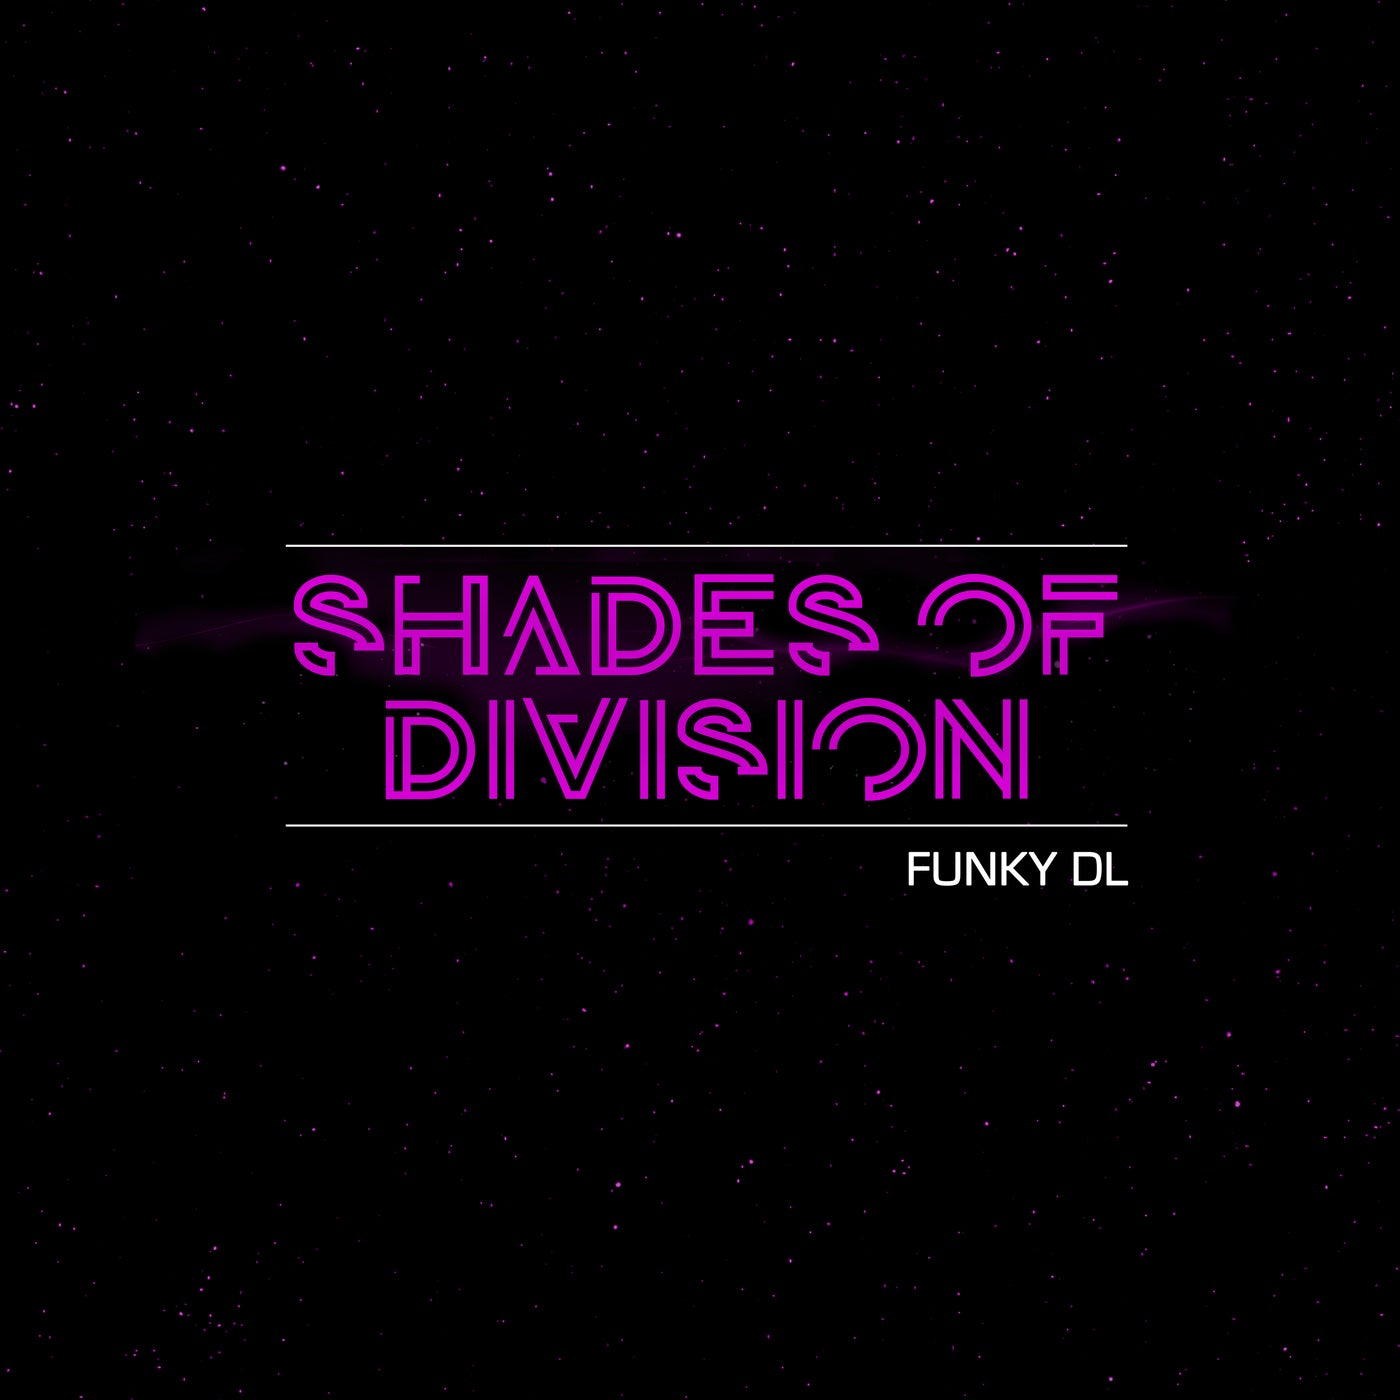 Shades of Division by Funky DL on Beatsource